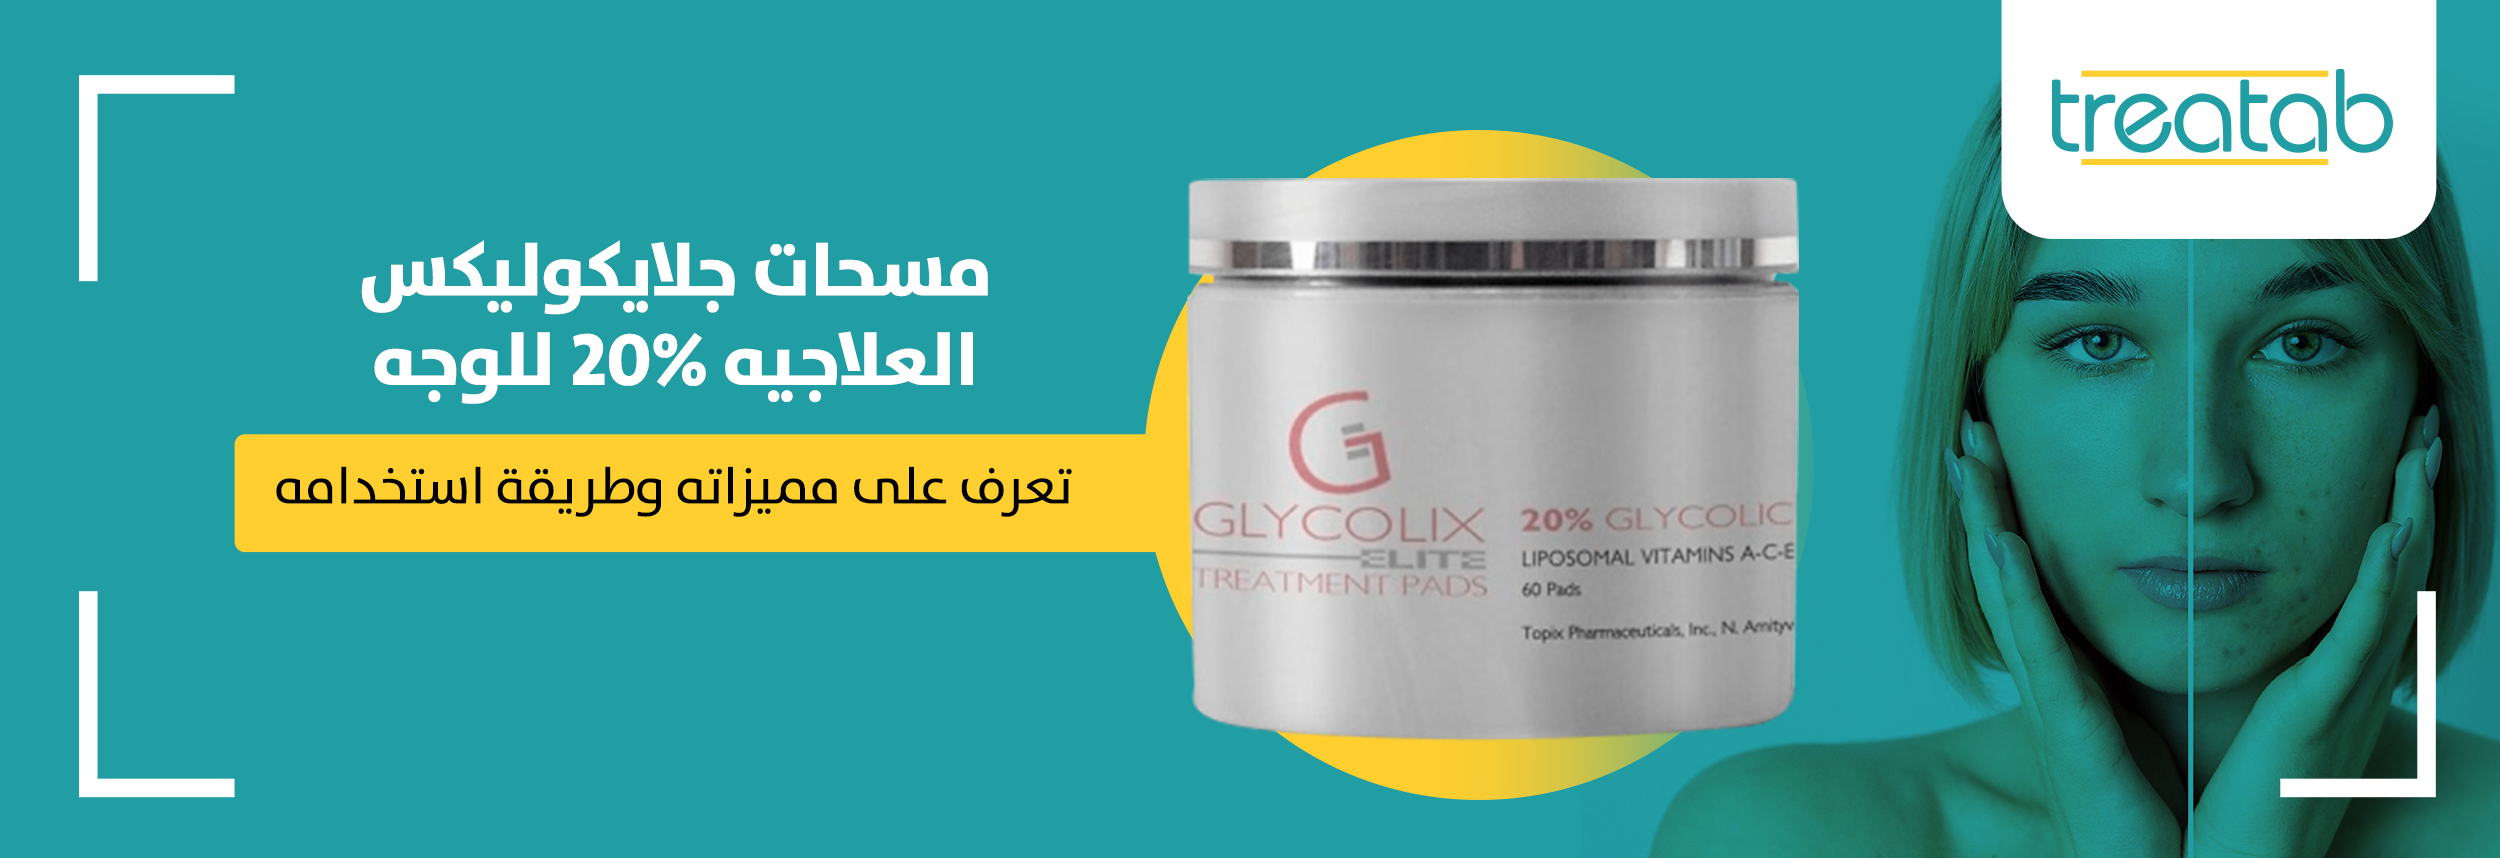 - Glycolex medicated swabs 20% for the face